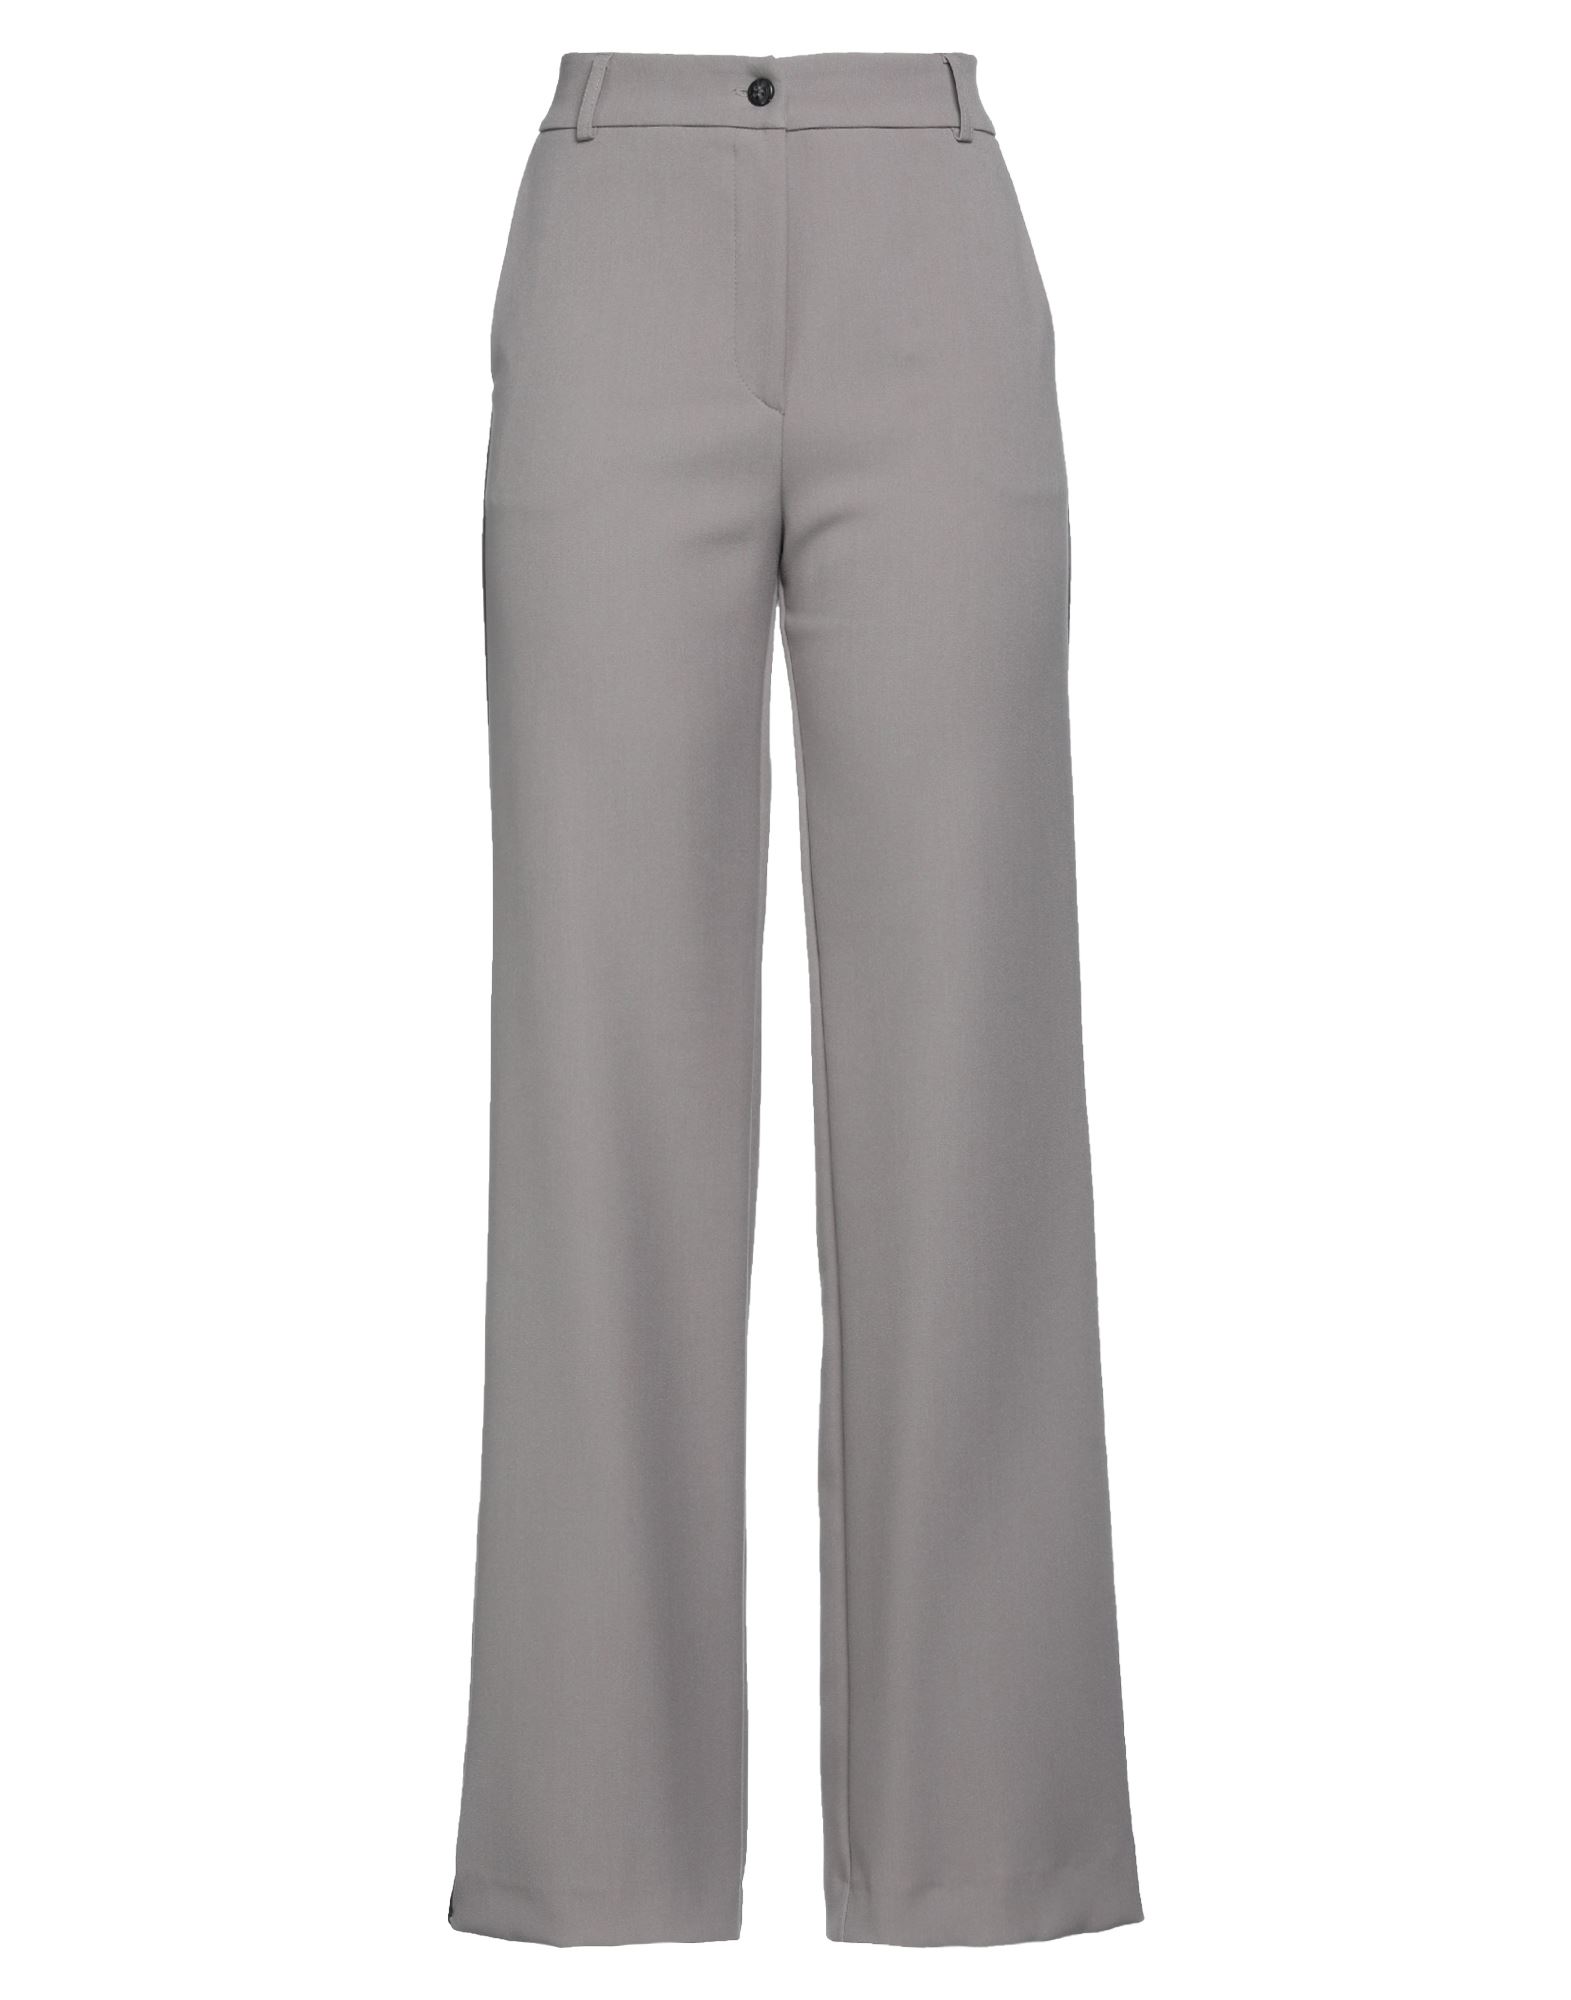 Access Fashion Pants In Dove Grey